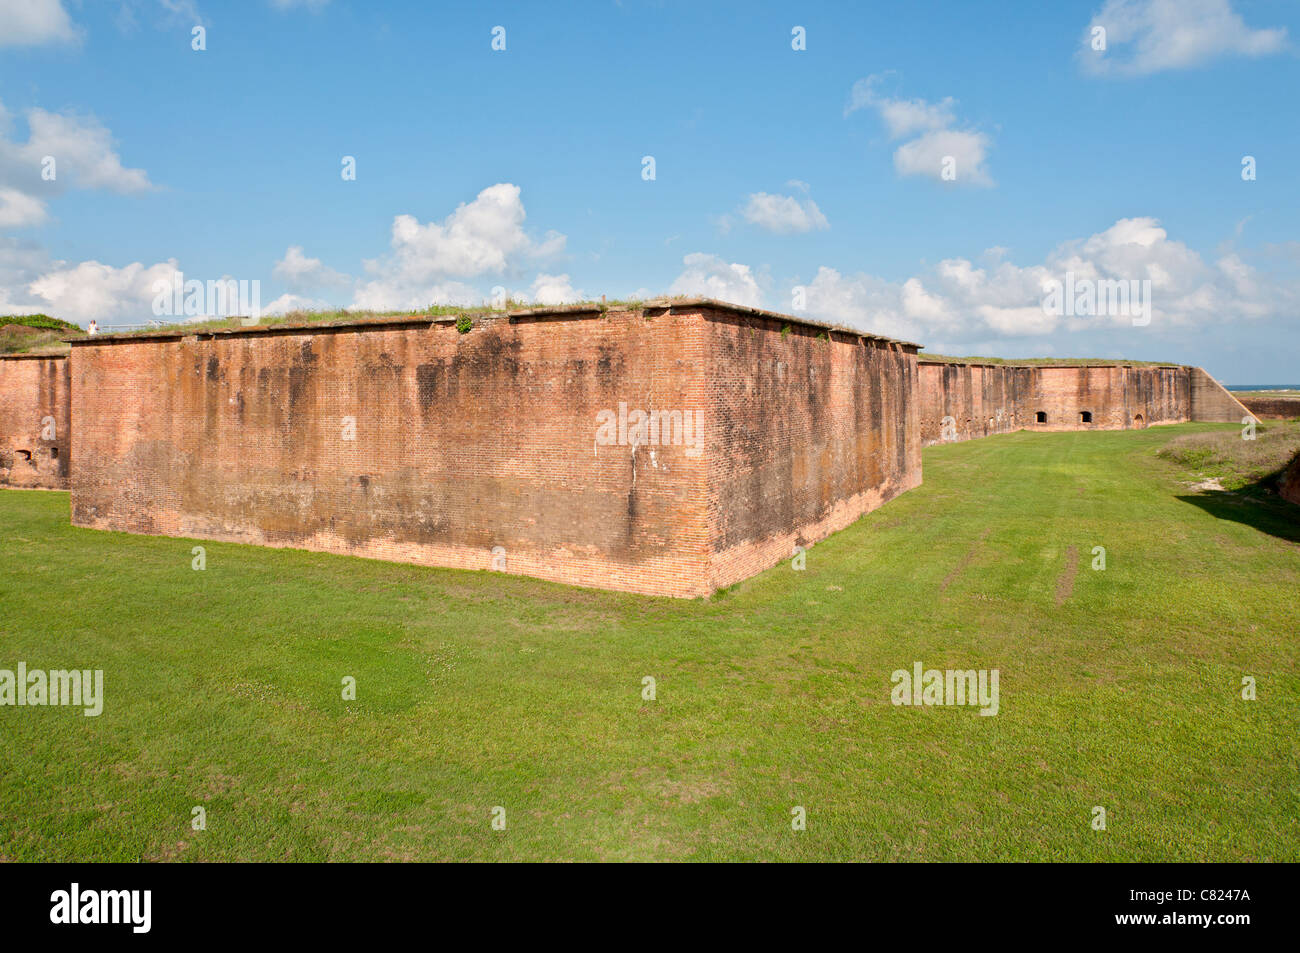 Alabama, Fort Morgan, National Historic Landmark, built to control entrance to Mobile Bay completed 1834 Stock Photo